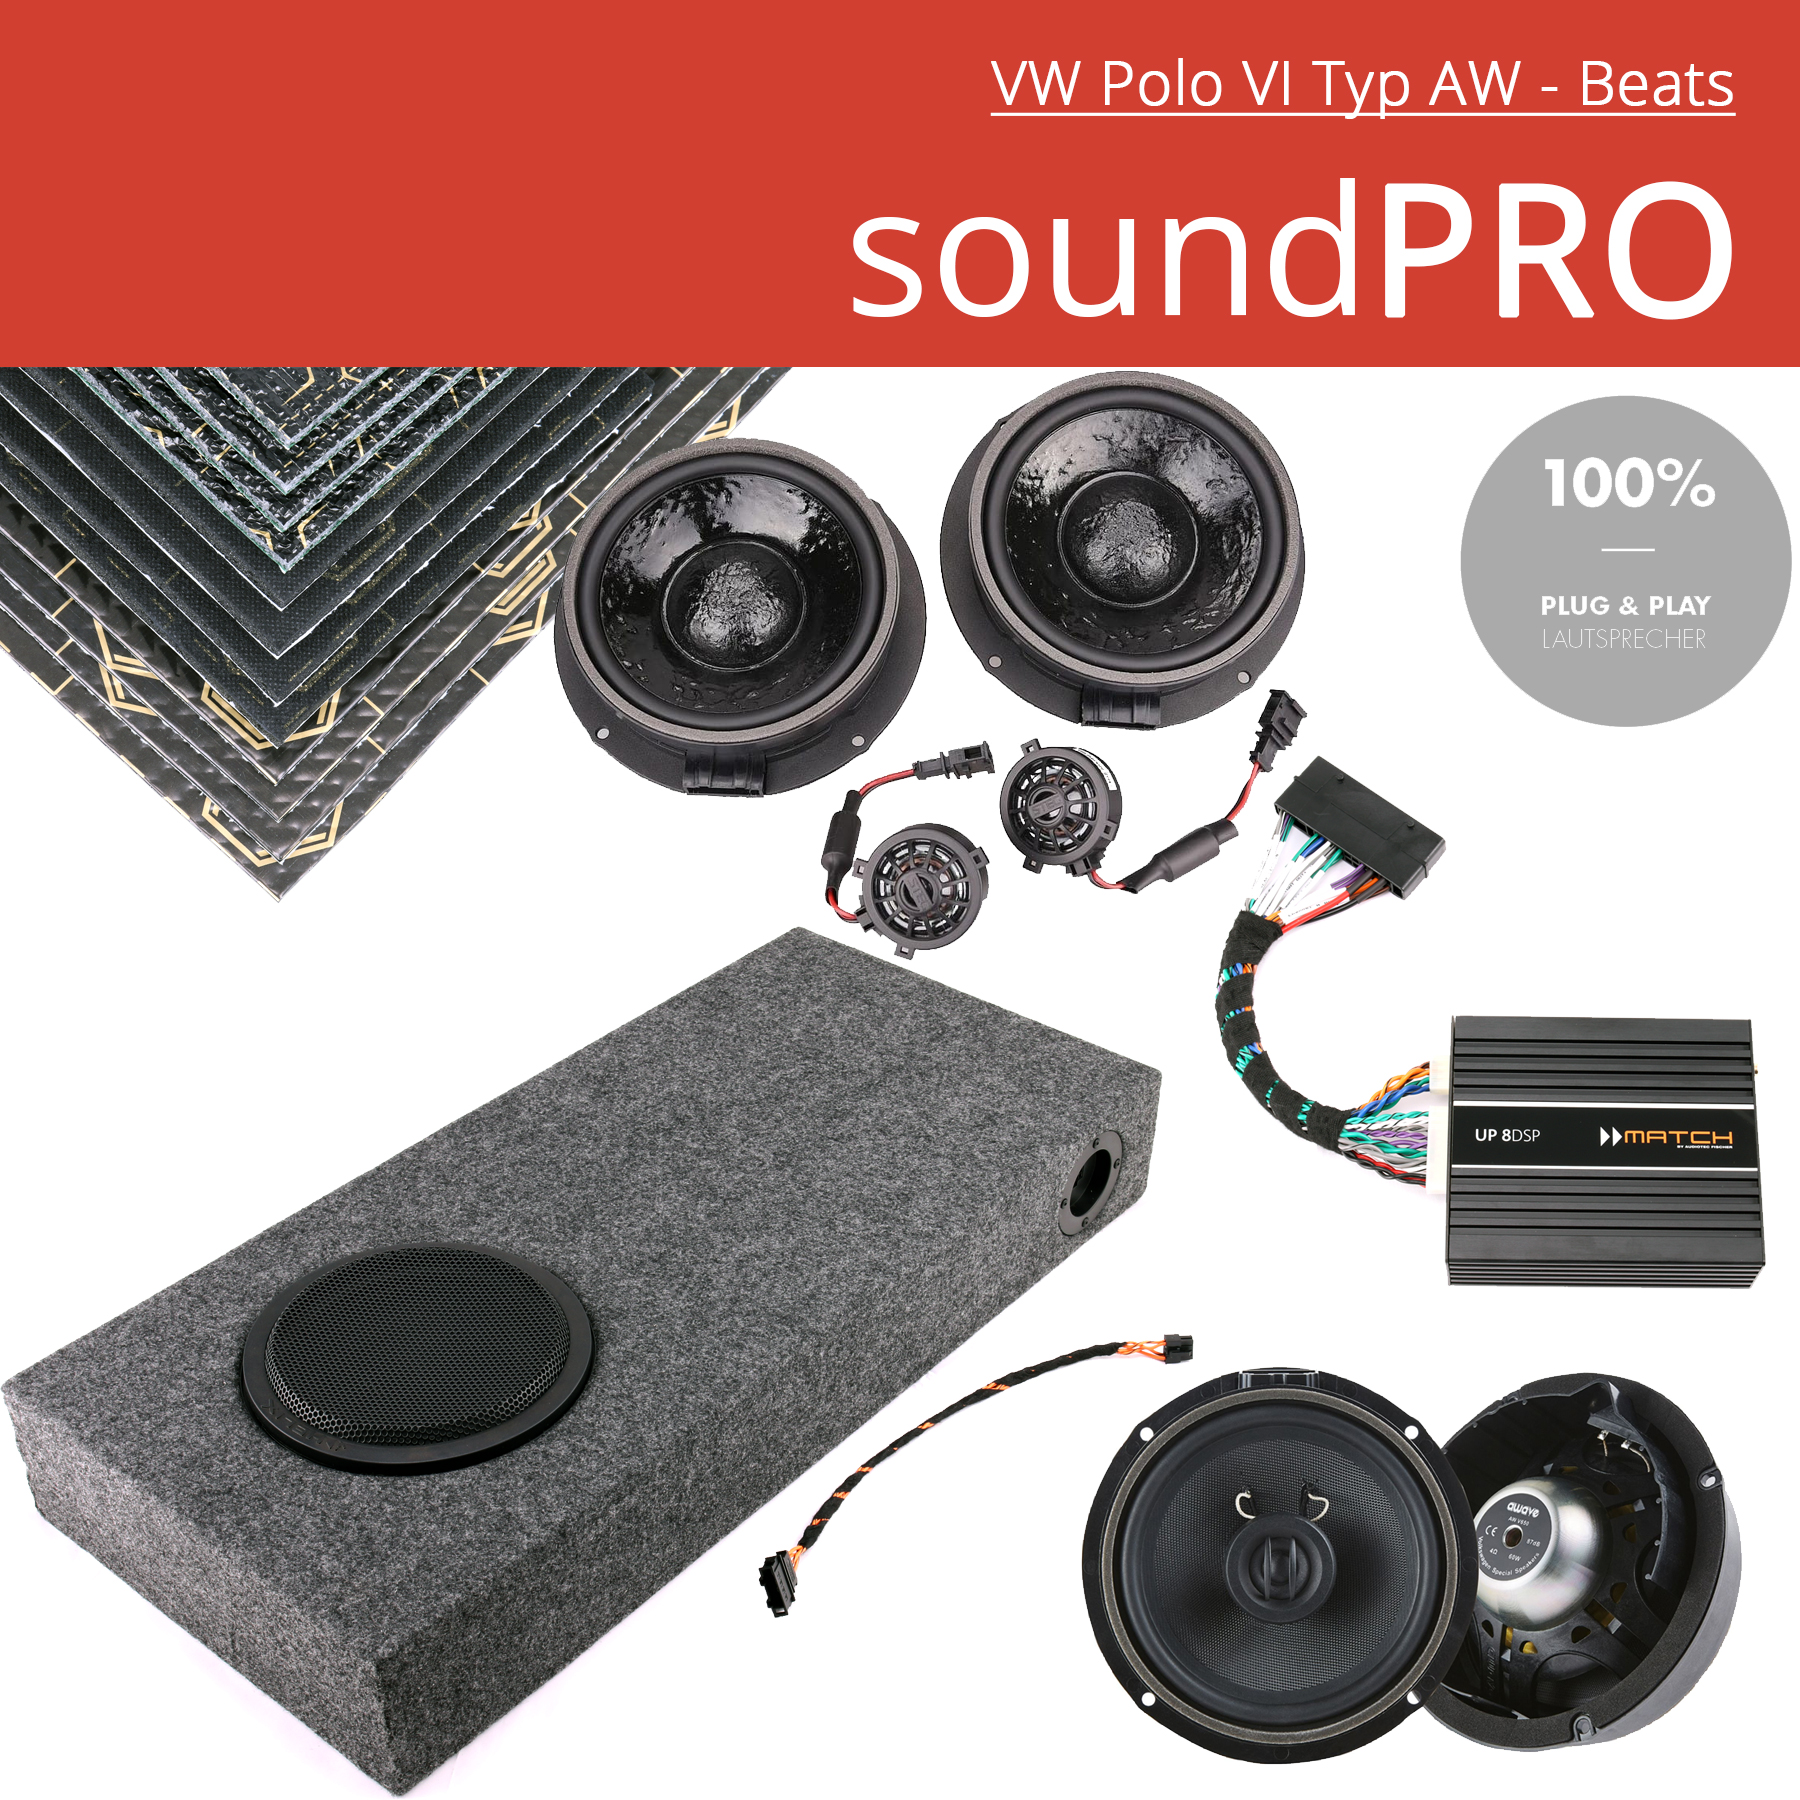 VW Polo 6 AW Beats soundPRO, 960W DSP Endstufen Upgrade System mit  Subwoofer